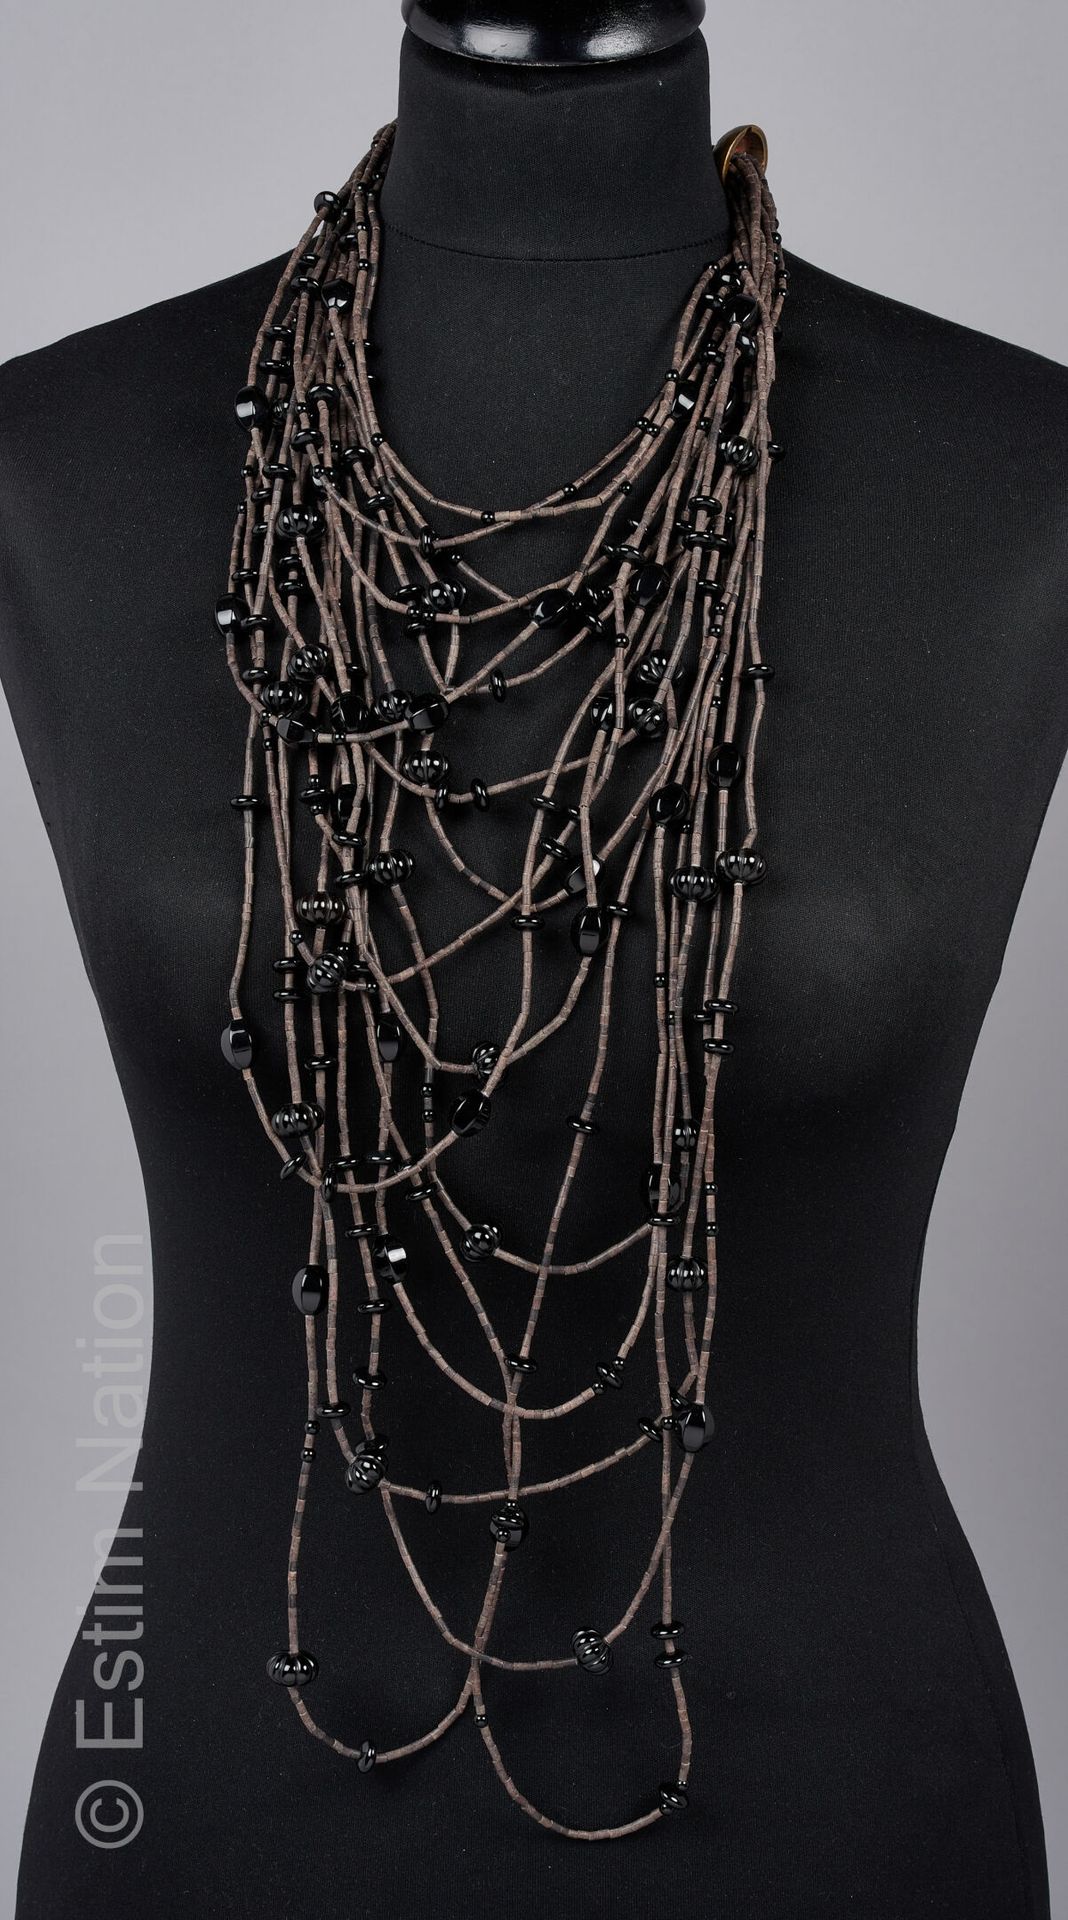 CESAREE Multi-row necklace made of wood and black glass beads (signed)